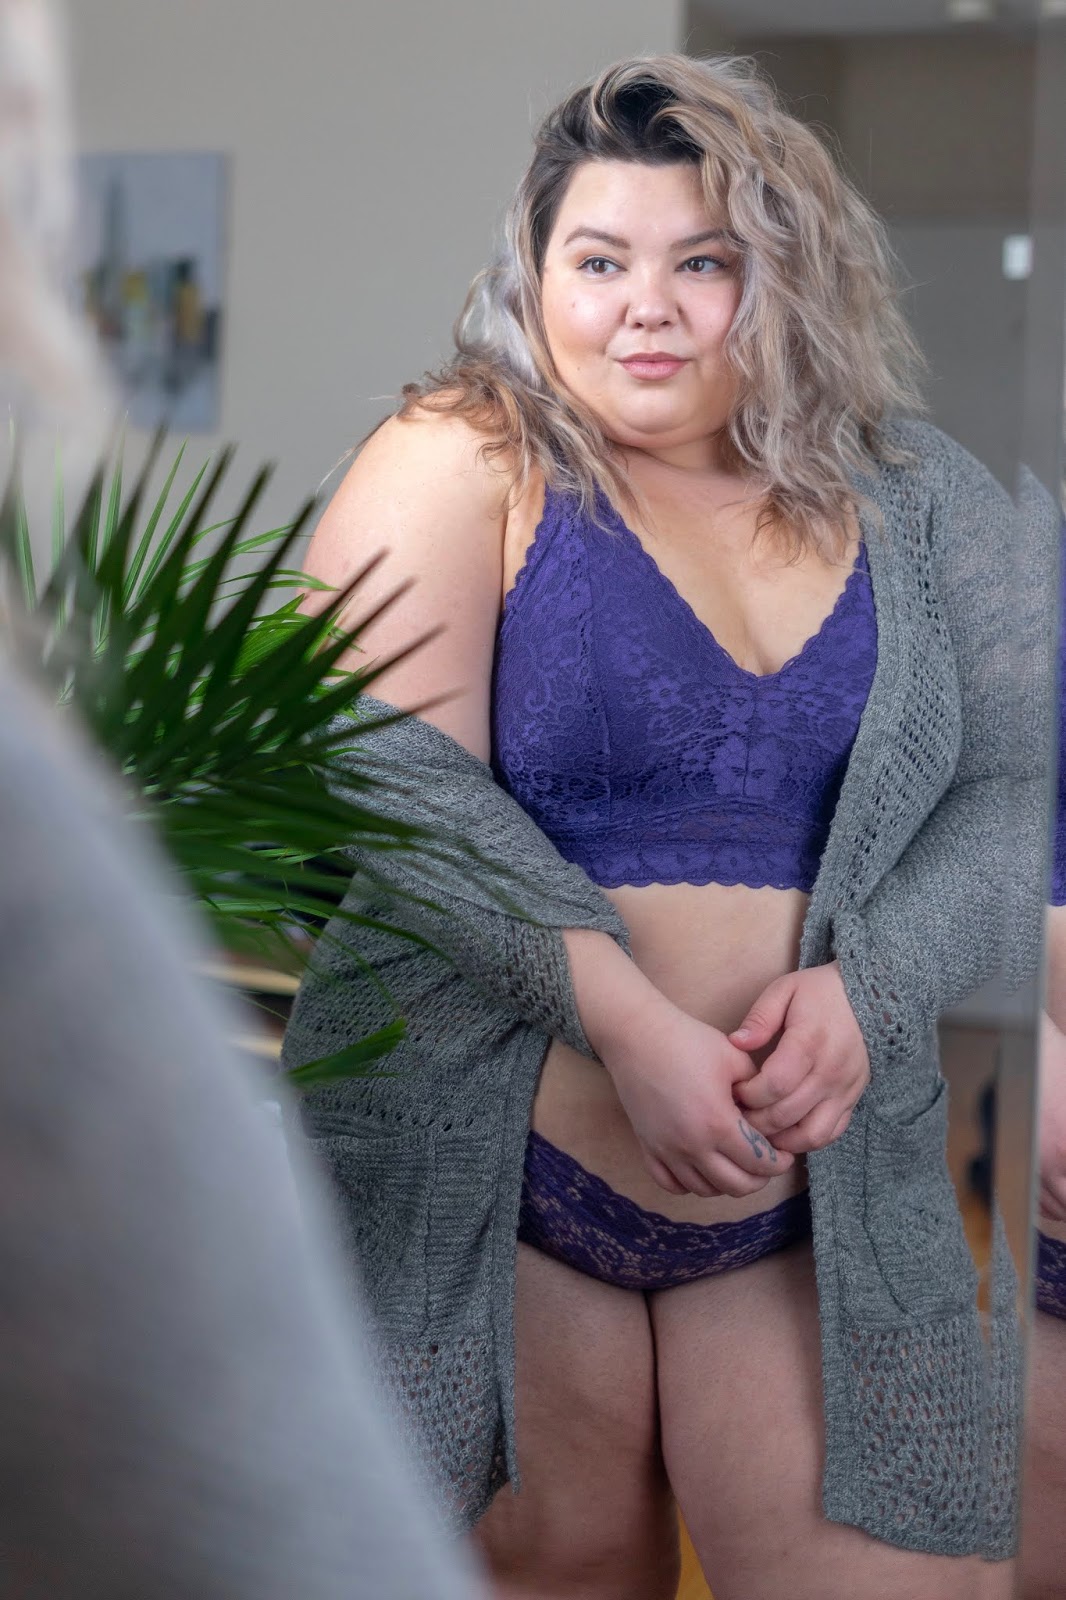 Chicago Plus Size Petite Fashion Blogger, YouTuber, and Model Natalie Craig, of Natalie in the City, shares how she builds confidence and some of her favorite lingerie